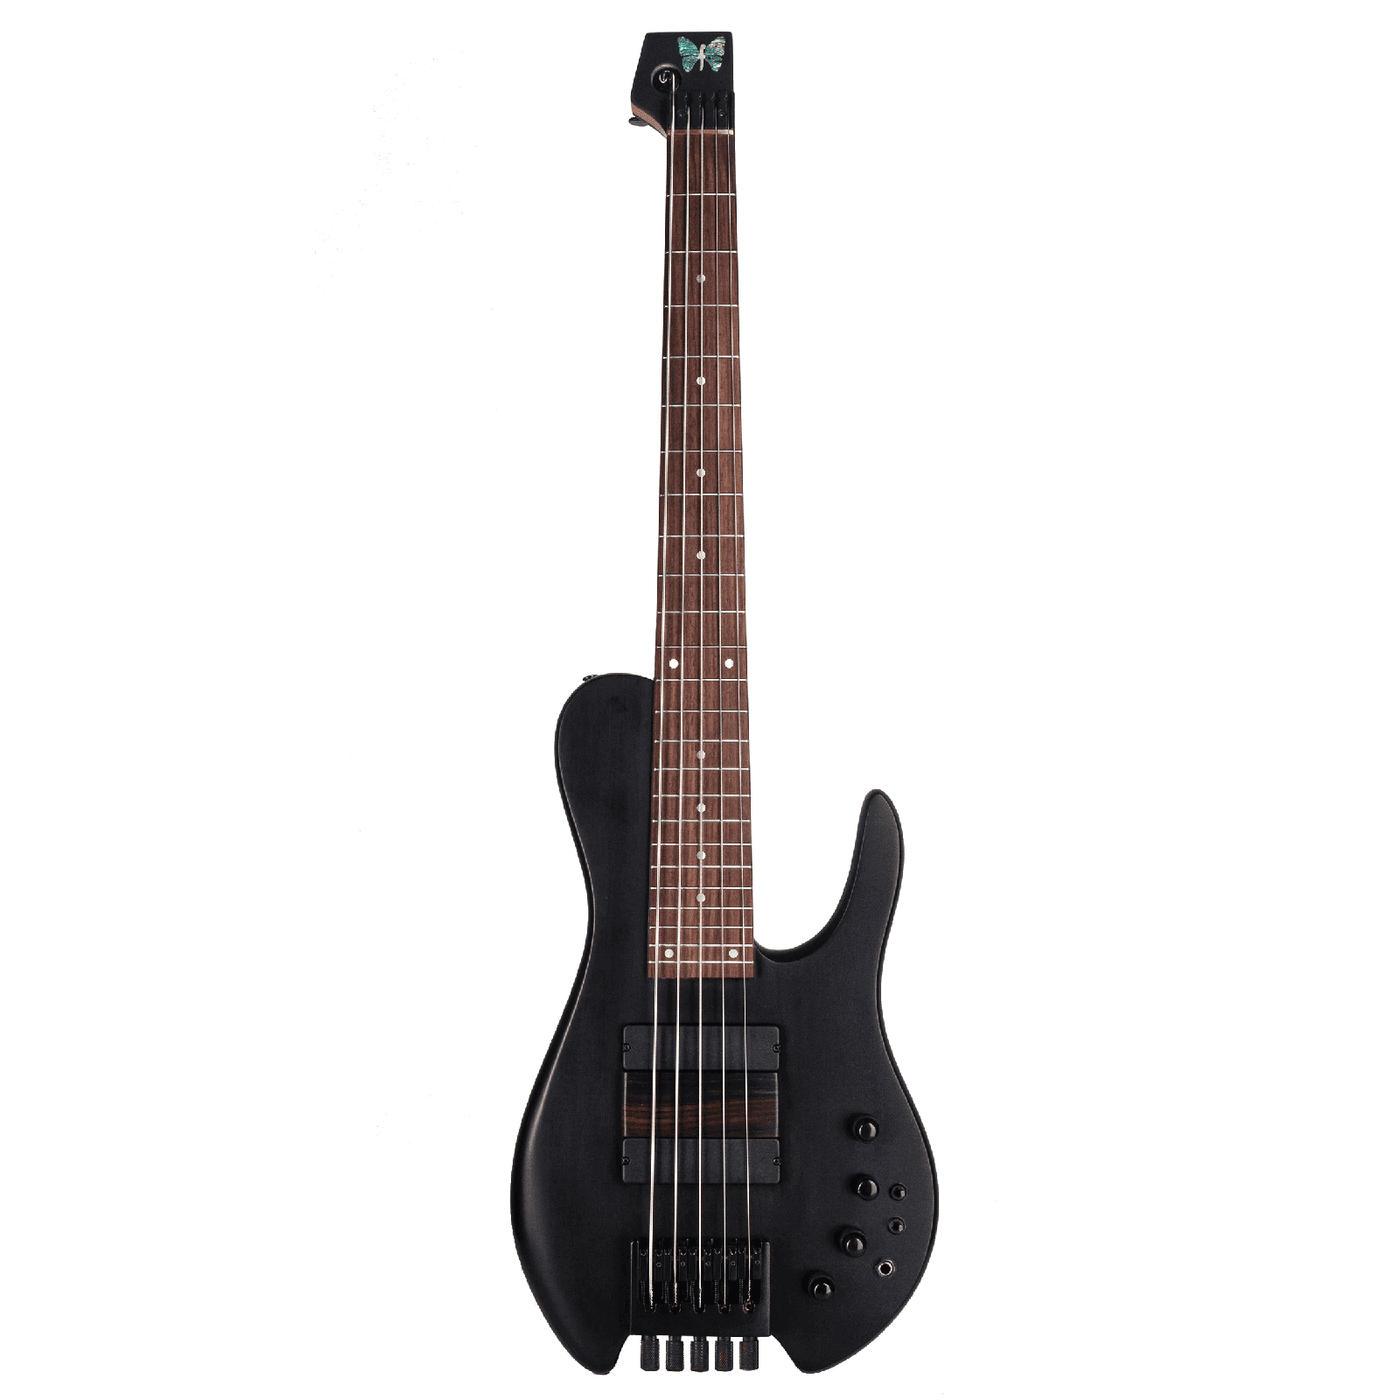 Fodera Matthew Garrison Imperial Mini Black - Fodera Guitars is proud to introduce the all-new Imperial Mini-MG! Designed in collaboration with Fodera artist and good friend, Matthew Garrison, the Mini-MG marks the next innovative chapter in bass guitar d